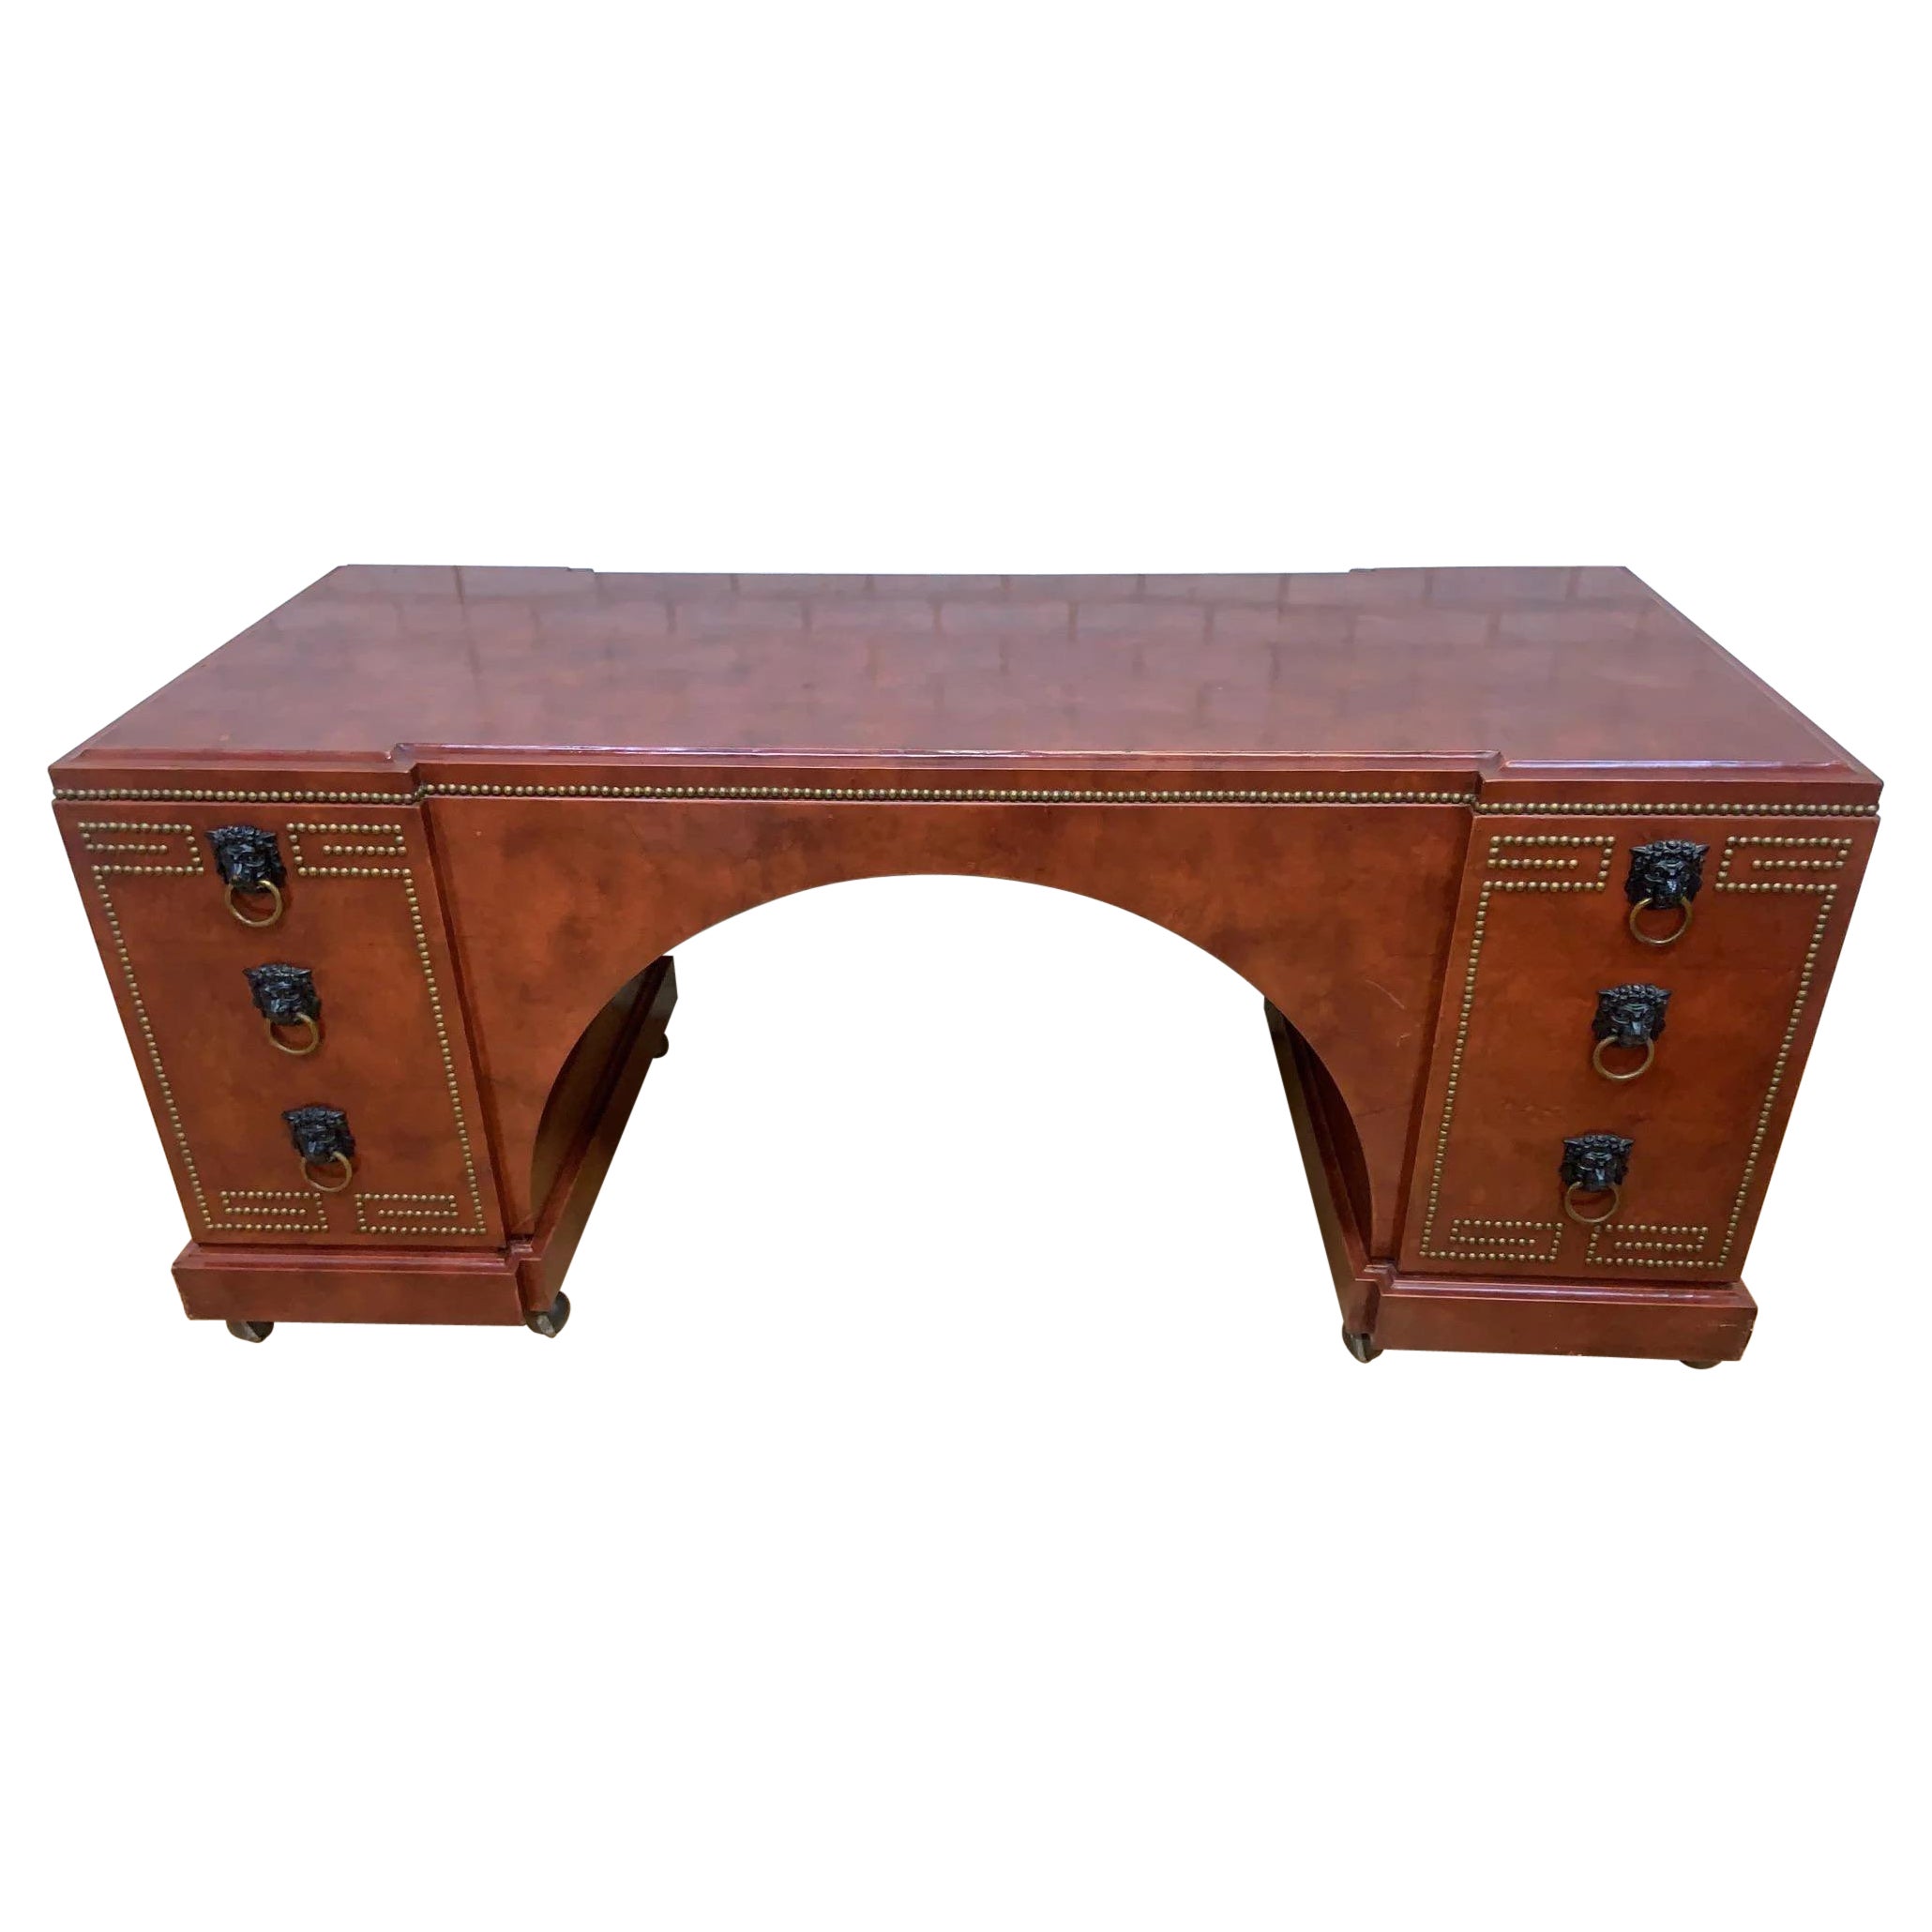 Vintage Baroque Style Leather Wrapped Studded Partner Desk with Lion Pulls